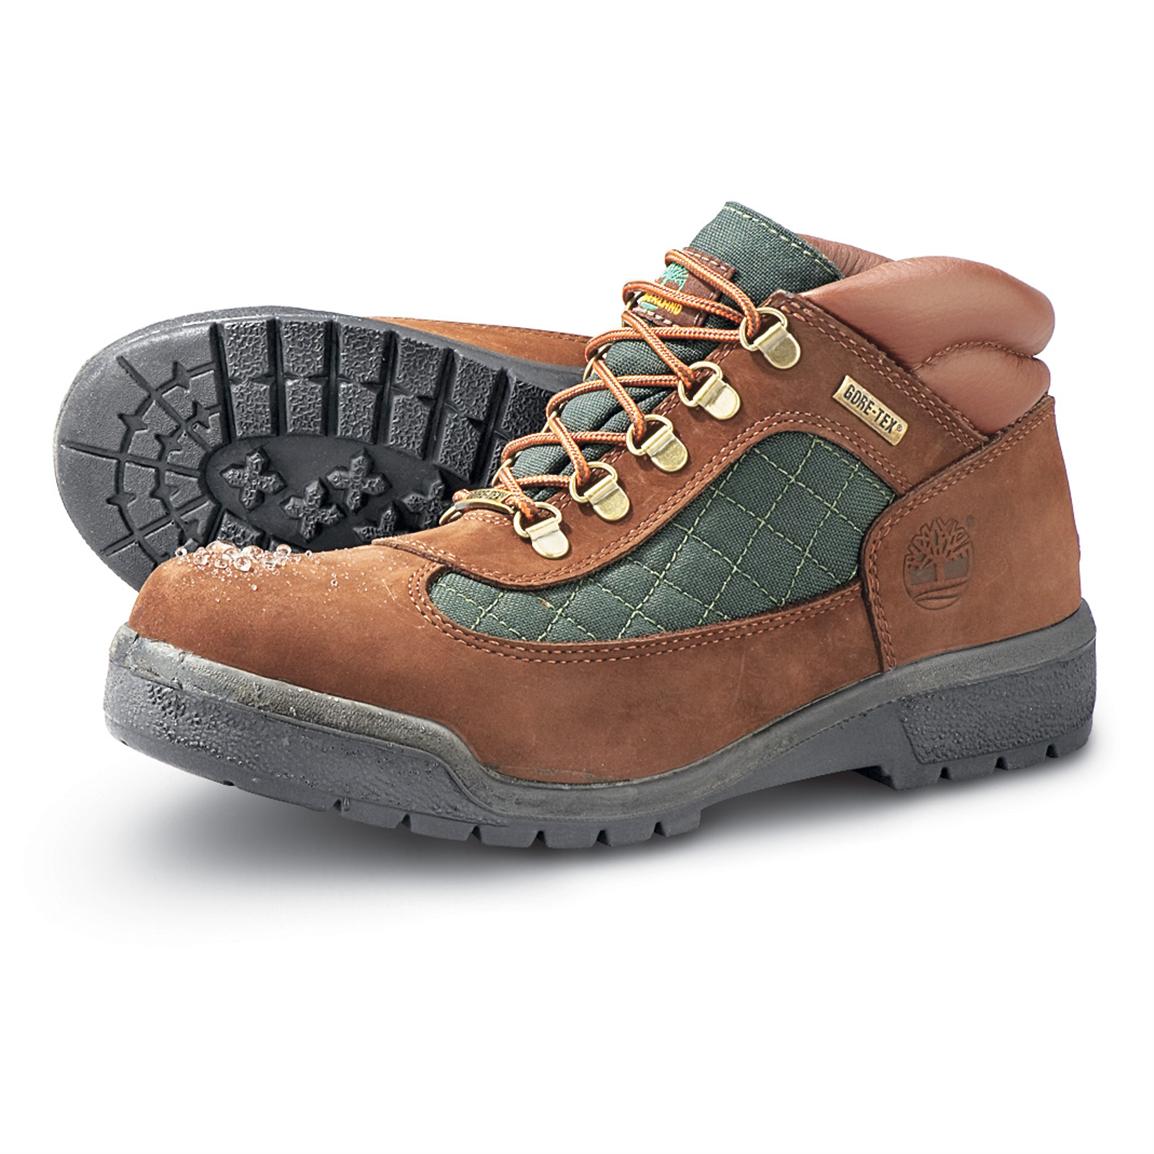 Men's Timberland® GORE-TEX® Field Boots, Brown / Green - 103789, Casual